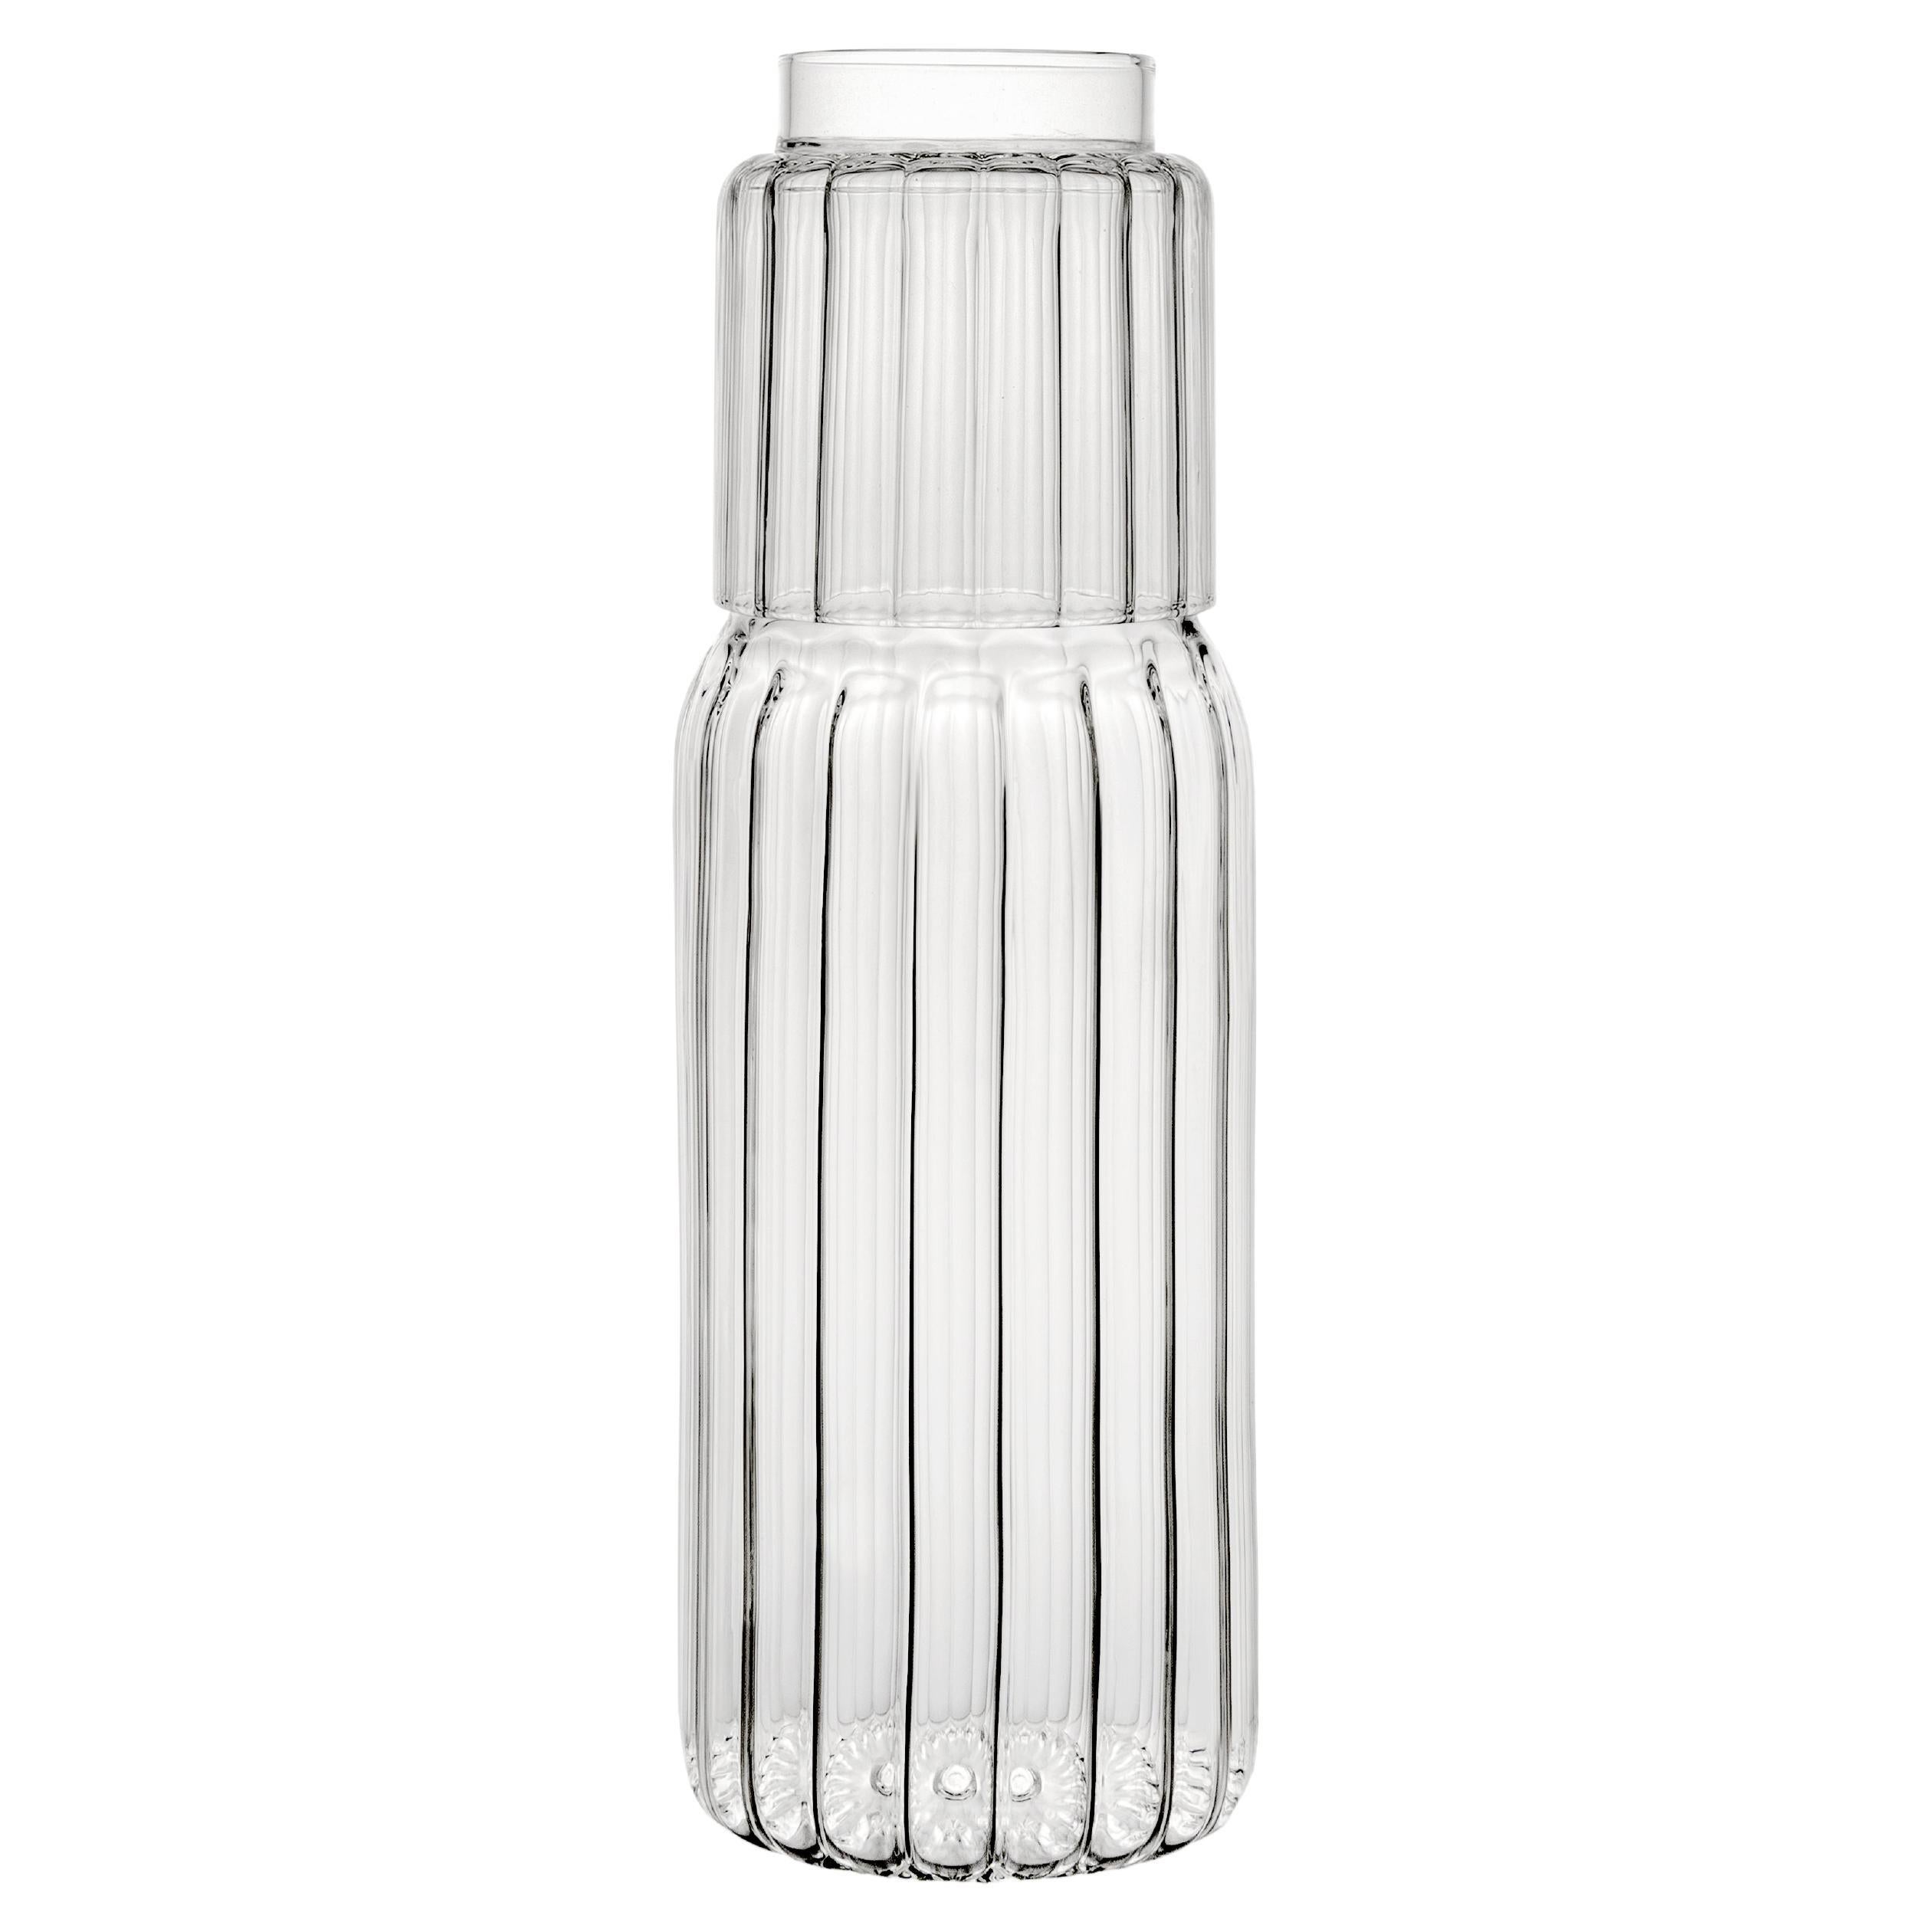 The linear form of the PILLAR carafe is inspired by architecture, and characterized by an understated yet imposing appeal.

A PILLAR tumbler glass is included in the set, serving as a lid for this versatile container that compliments the nightstand